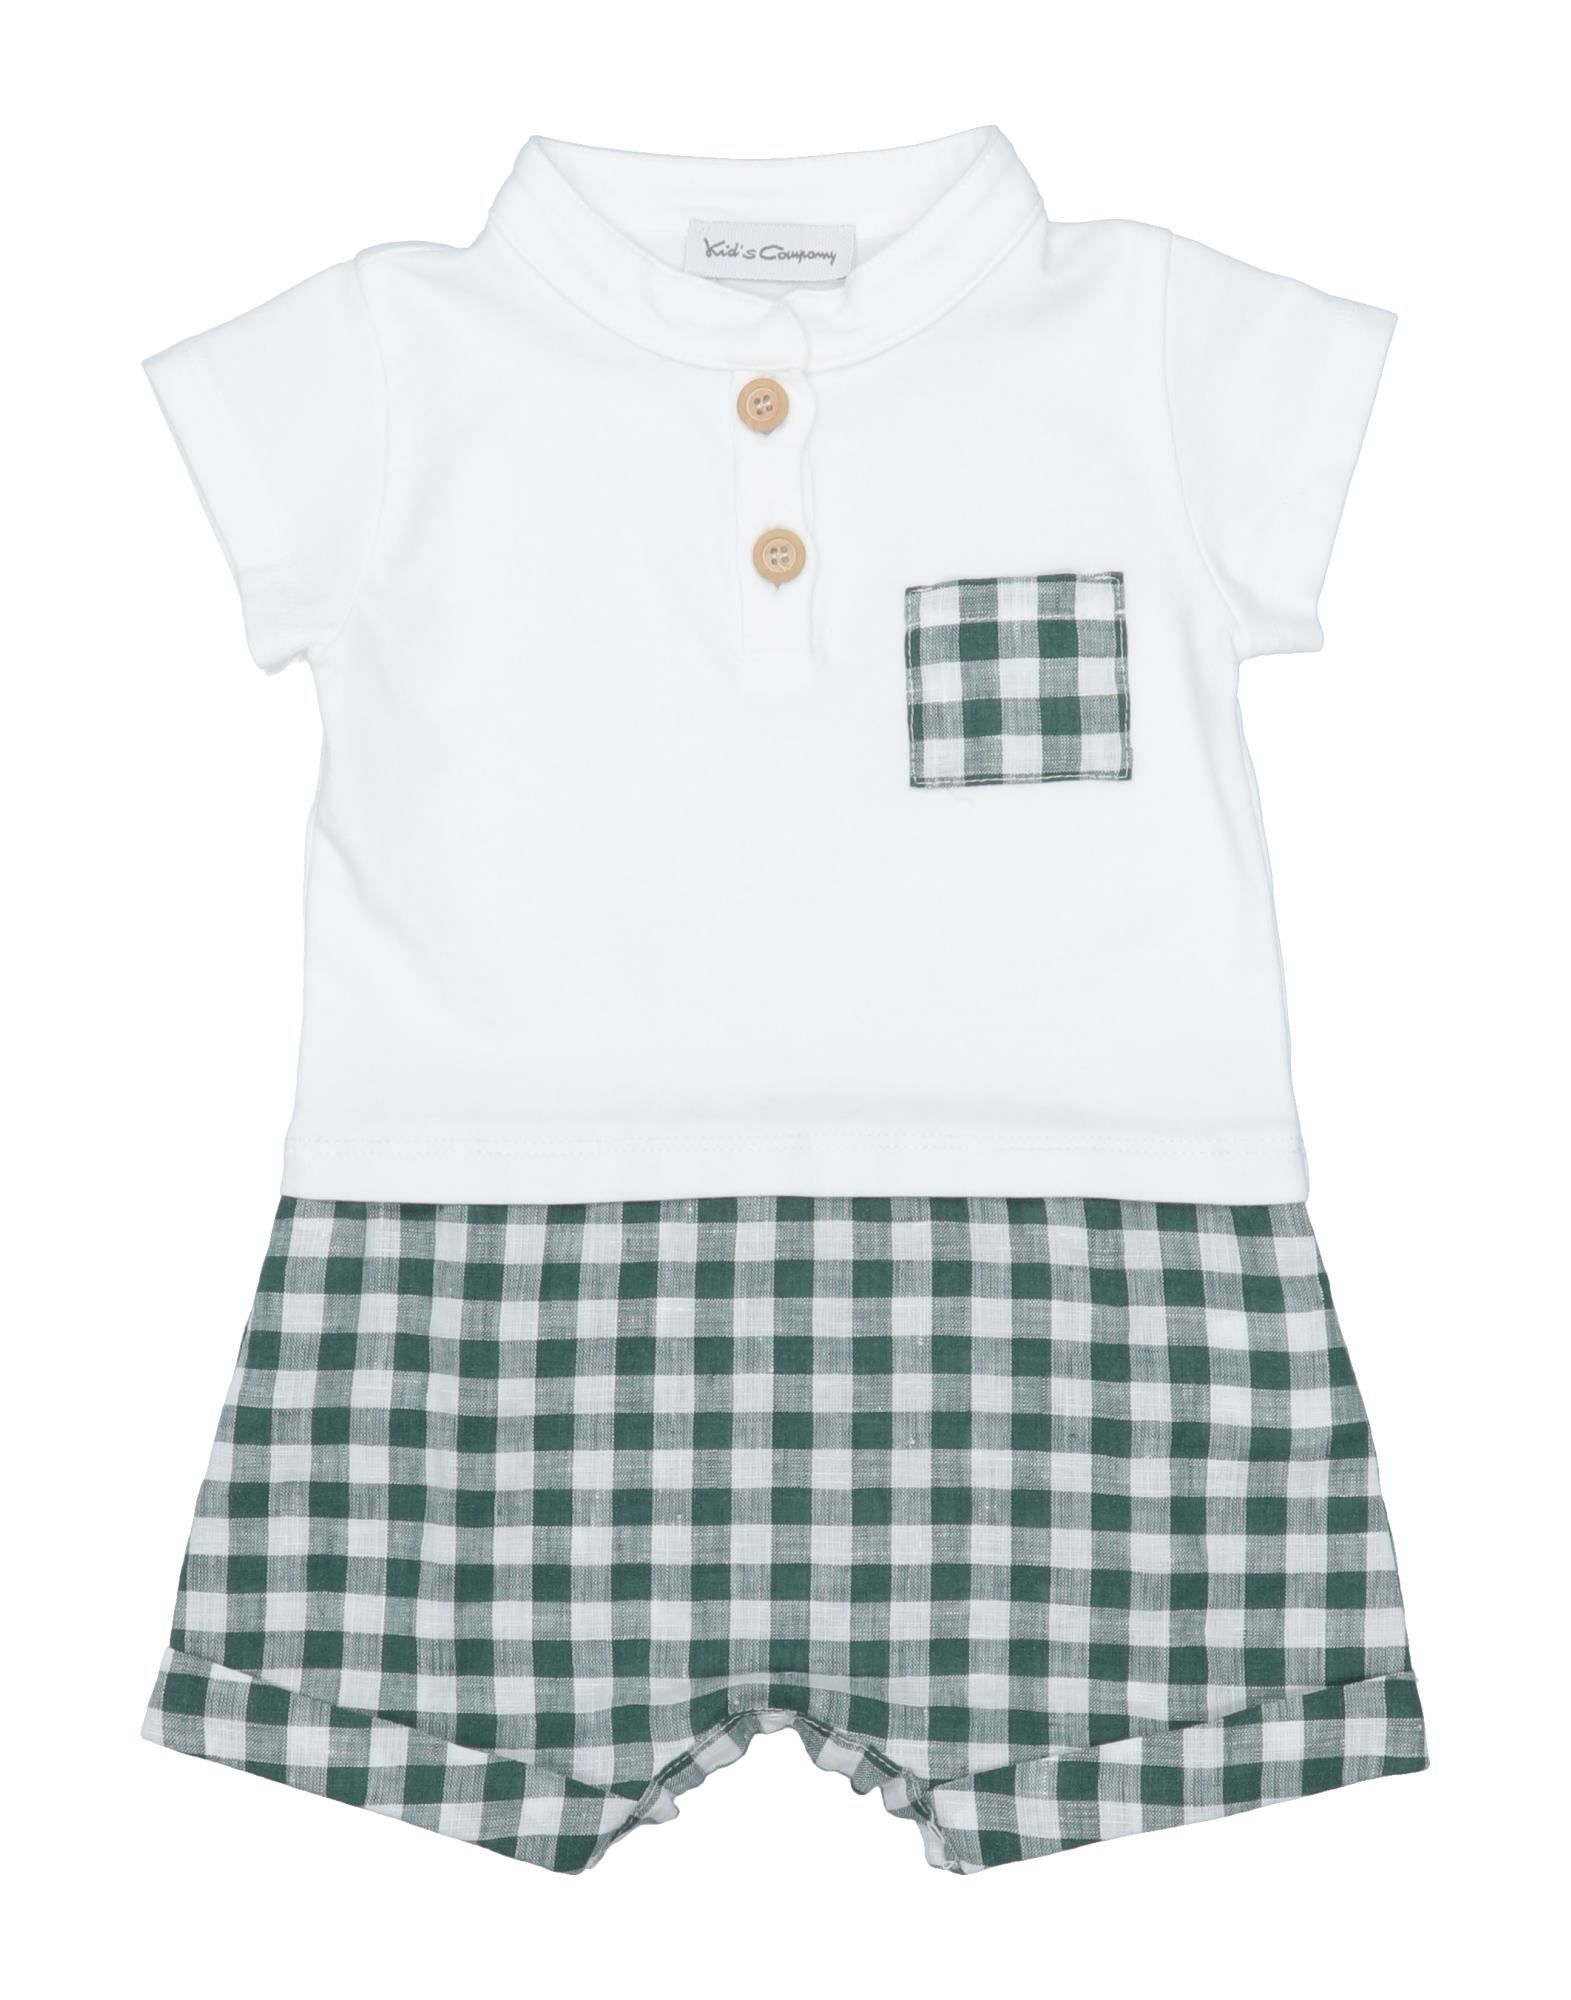 Kid's Company Kids' One-pieces In Dark Green